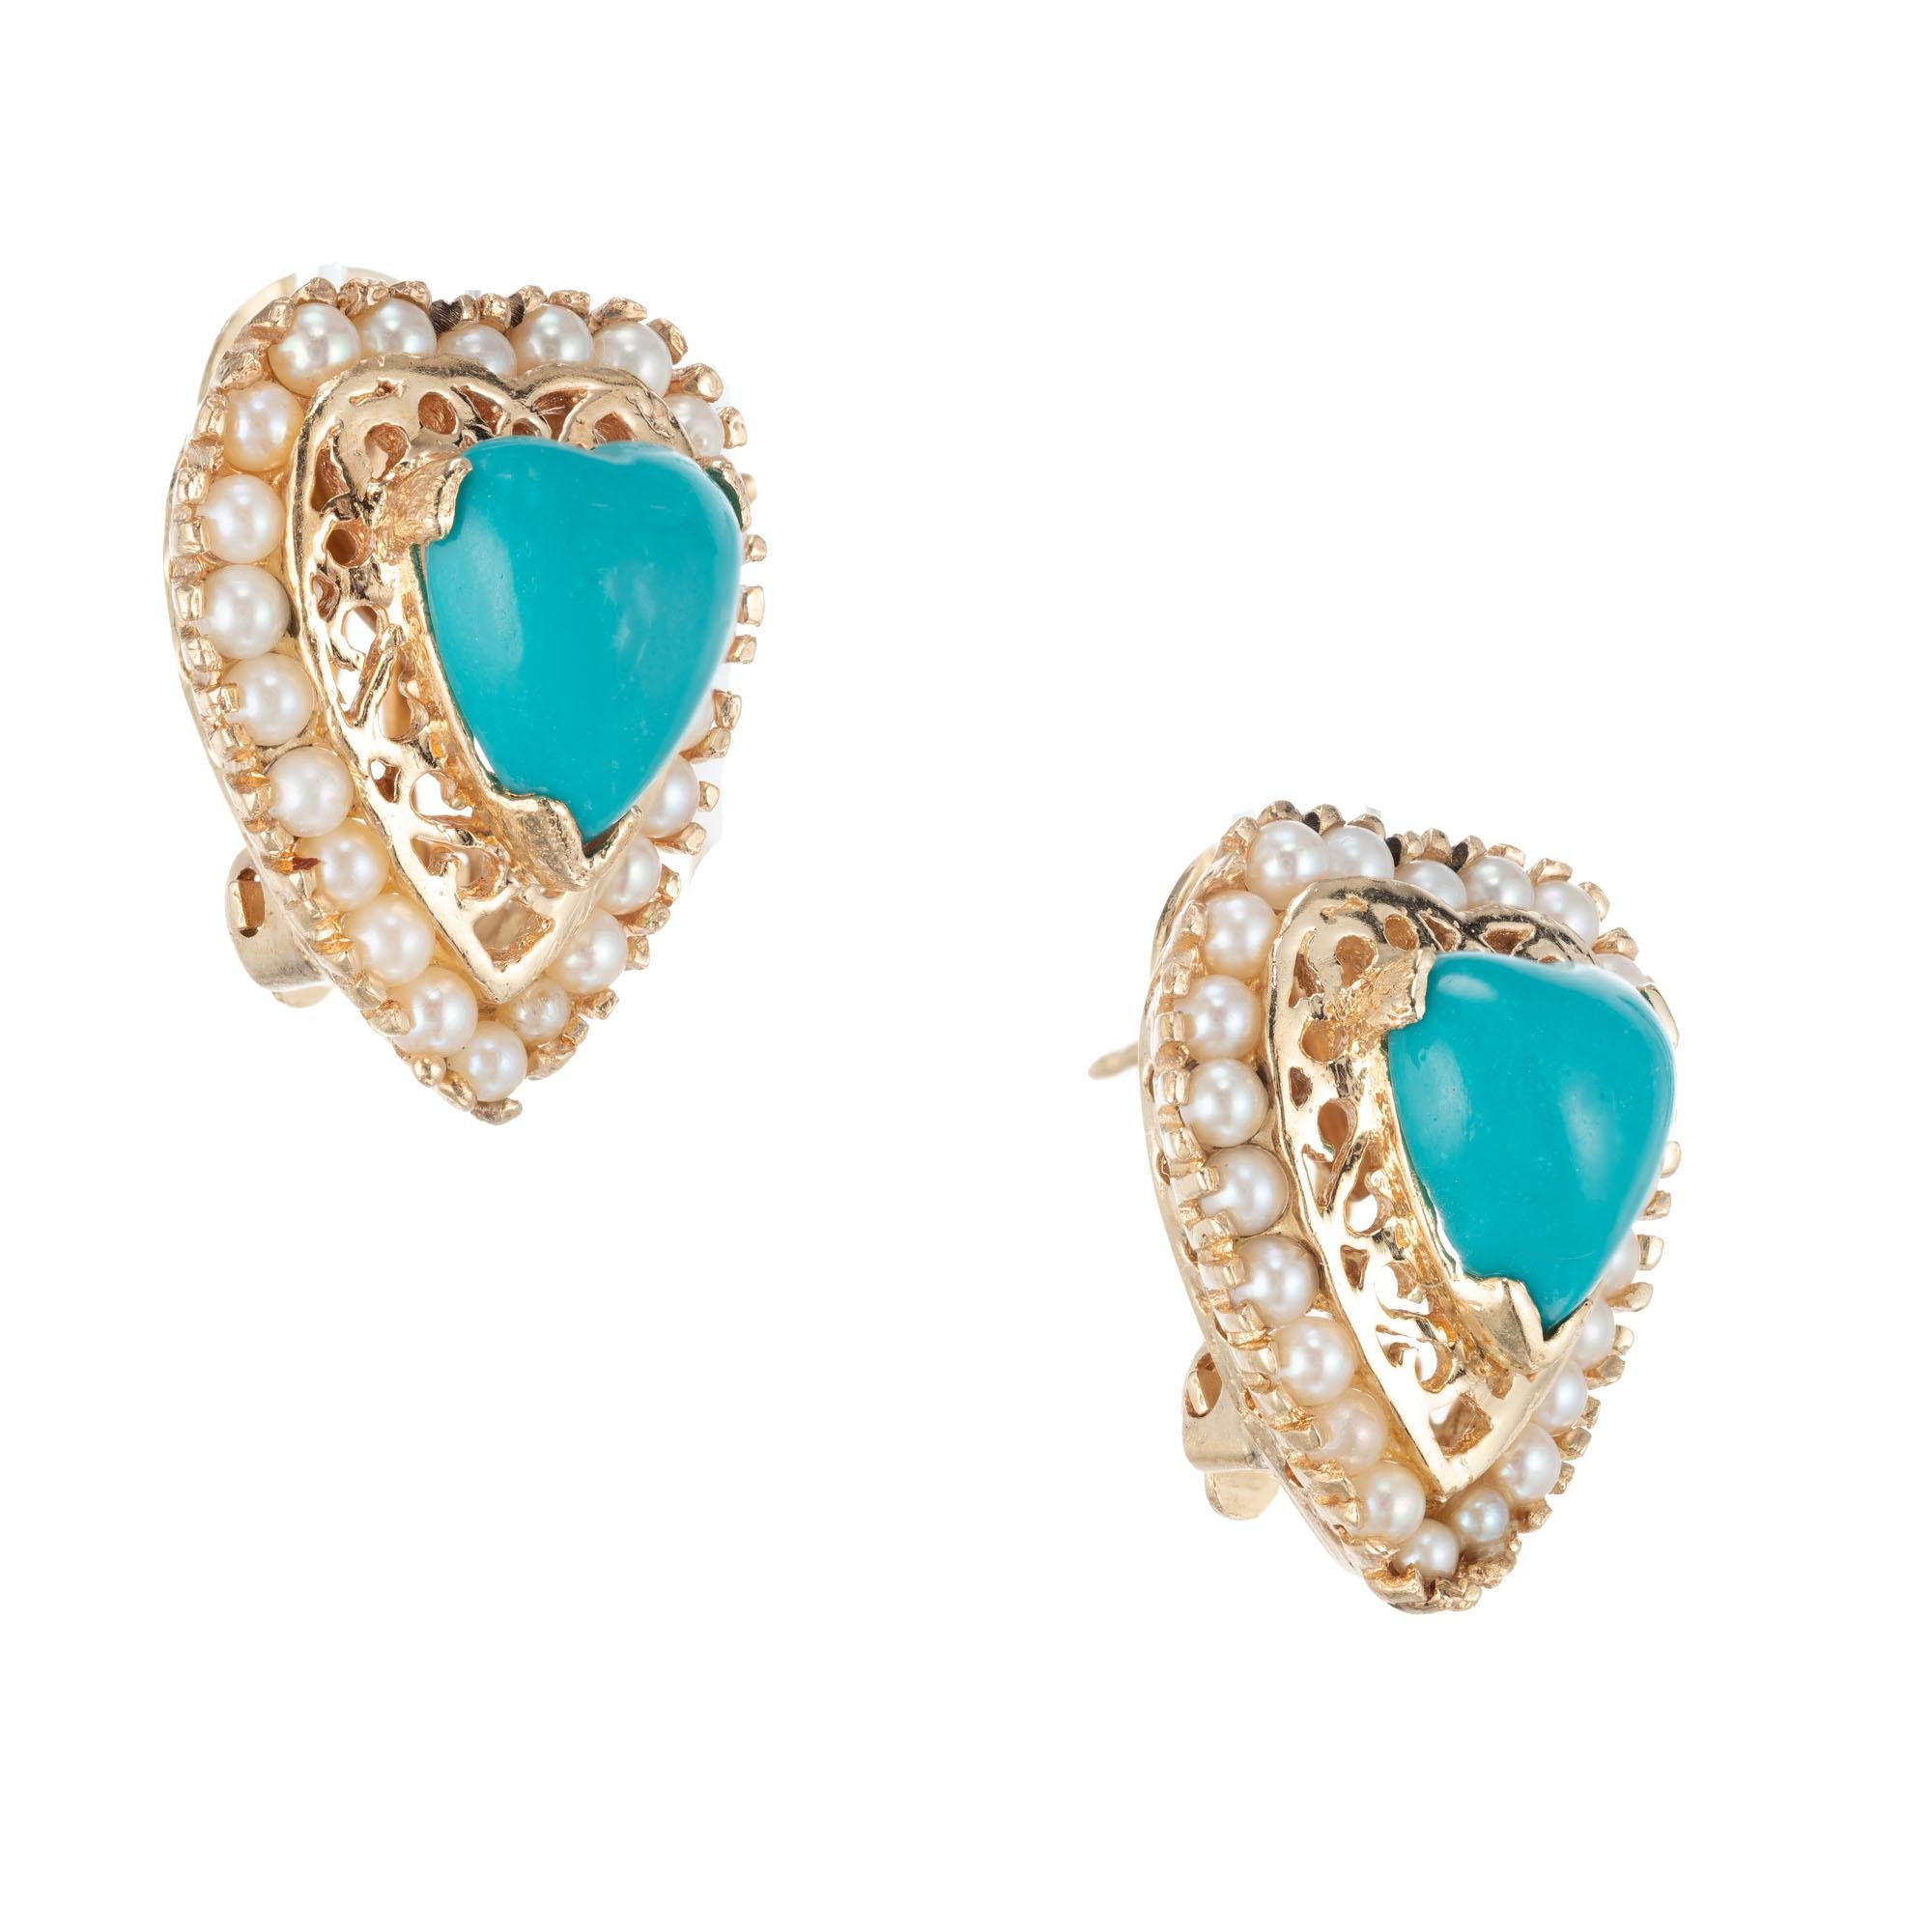 Mid- Century Heart shaped Turquoise clip post earrings with a halo of round cultured pearls. 1950’s open work 14k yellow design setting. 

 48 2mm cultured pearls
 Turquoise 10 x 9.5mm
 14k yellow gold 
 12.8 grams
 

